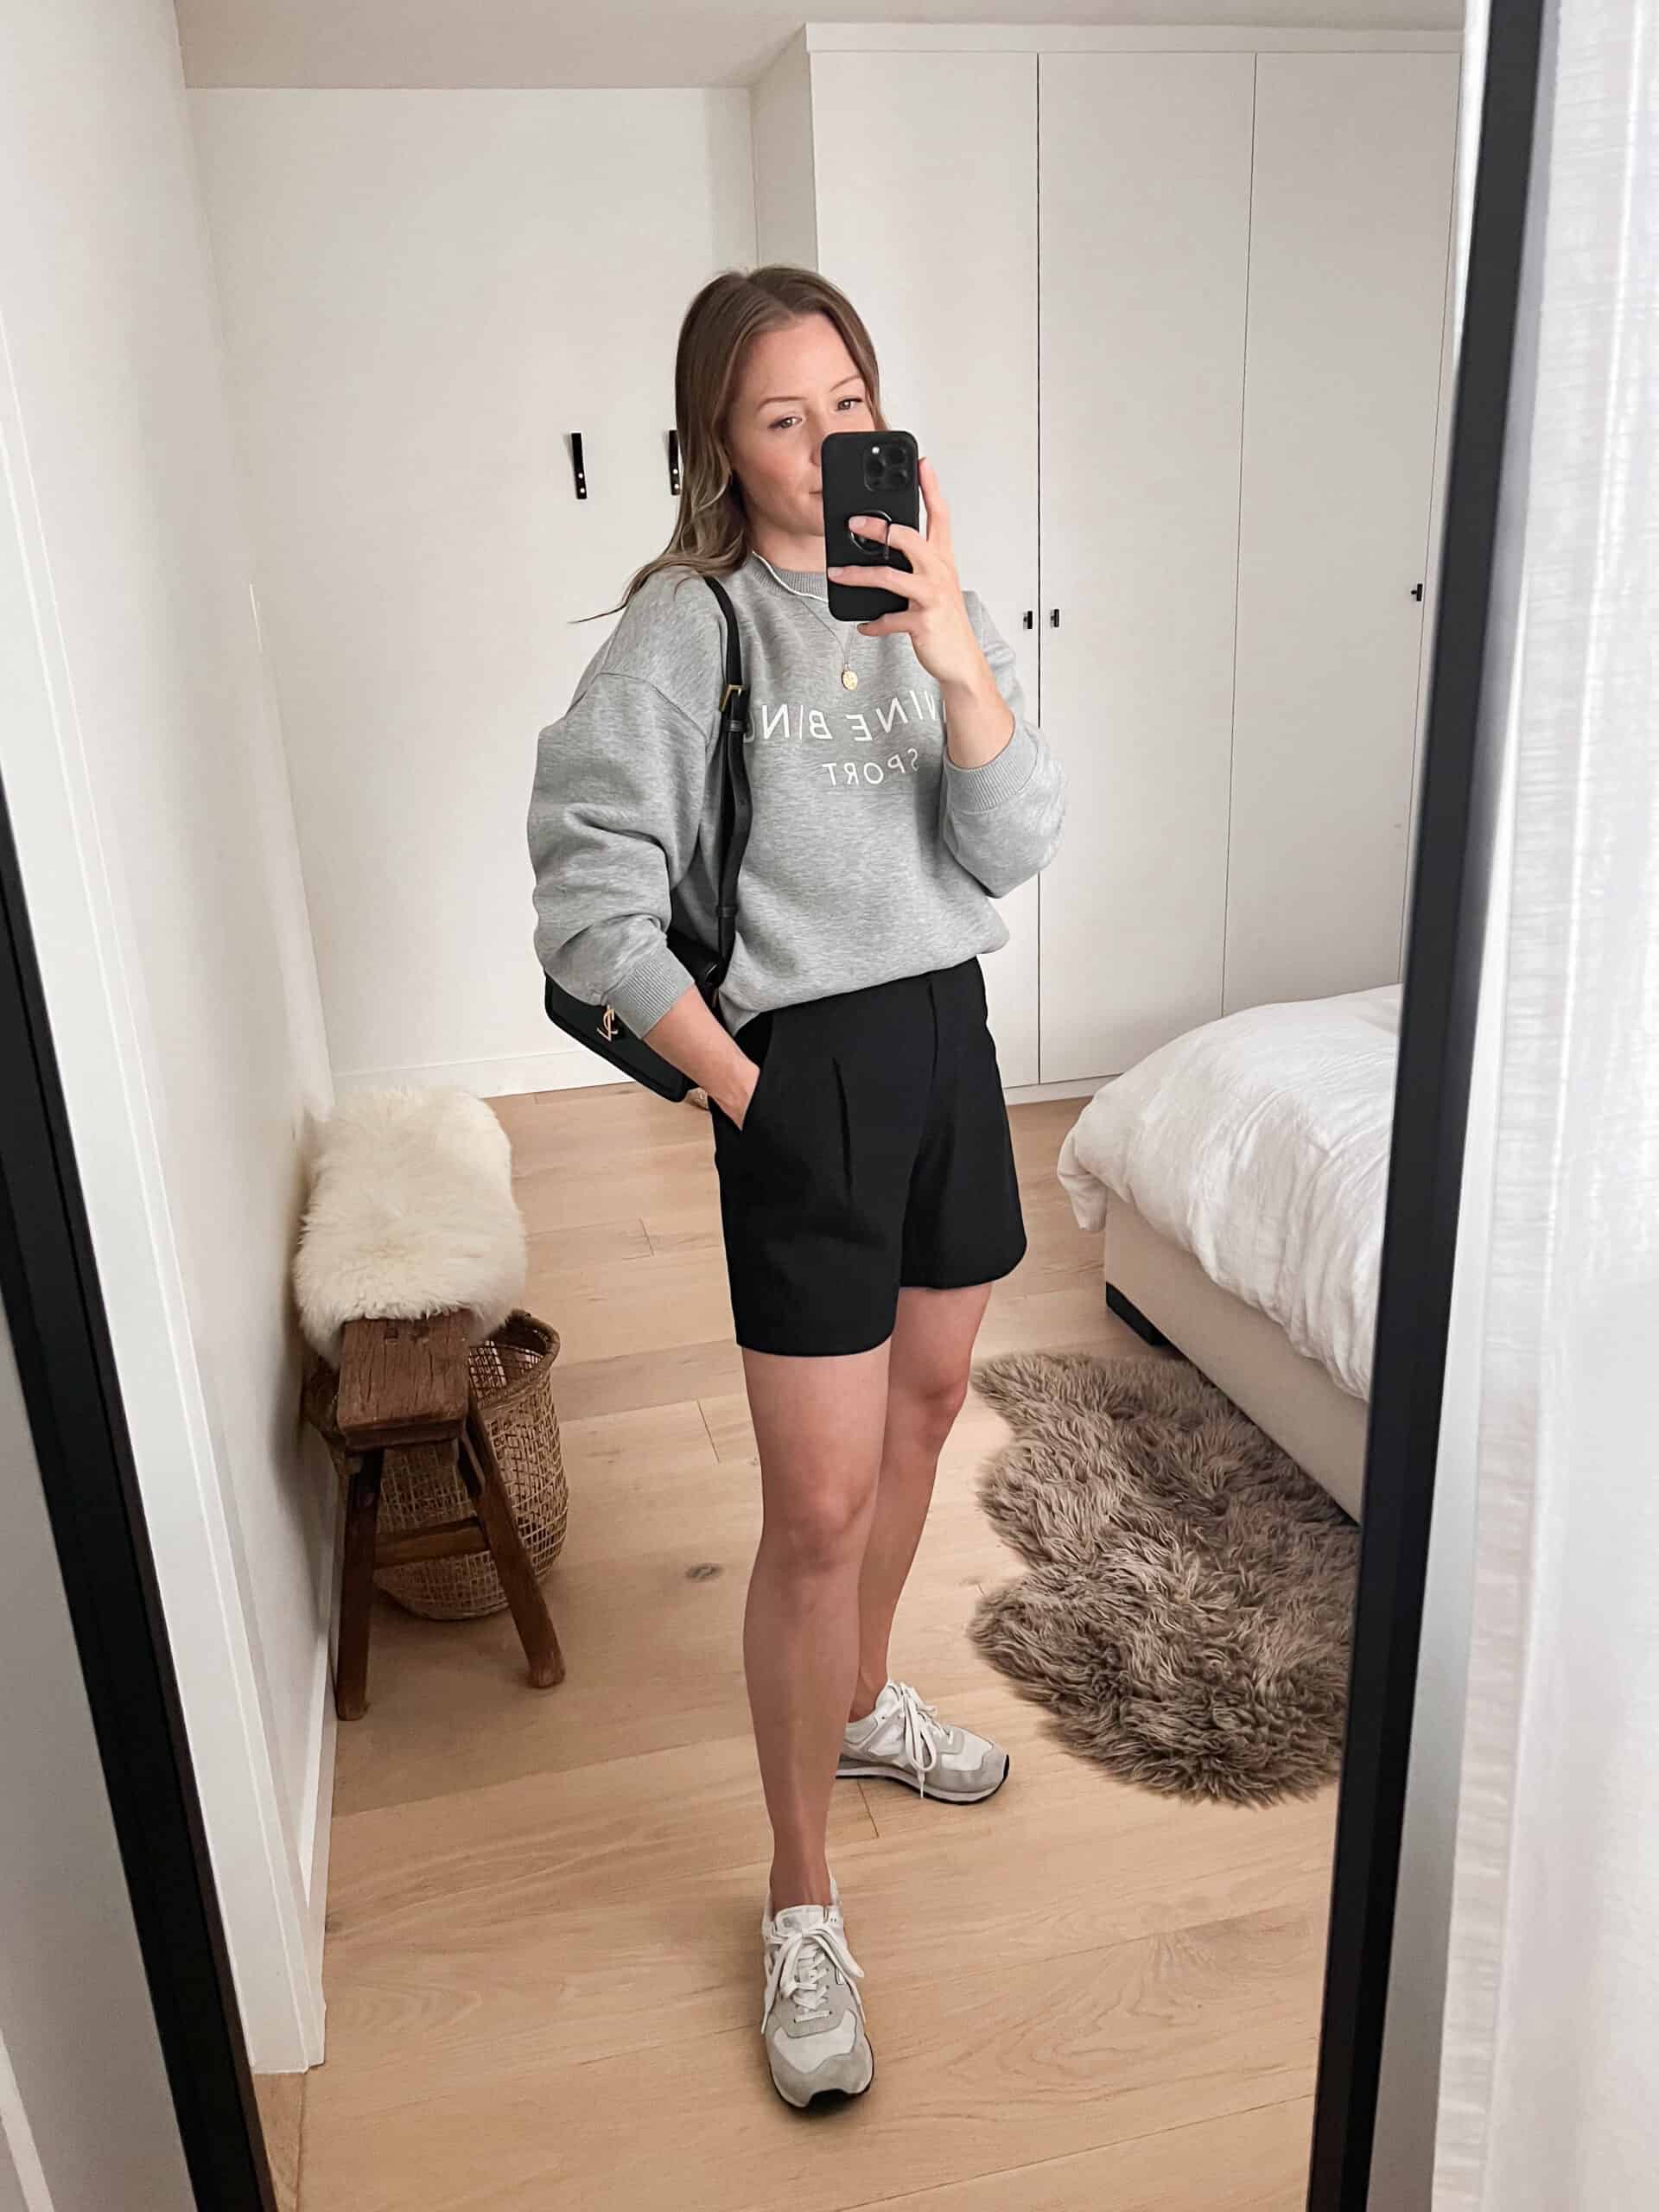 A woman wearing black linen shorts with a grey sweatshirt, trainers, and a black handbag